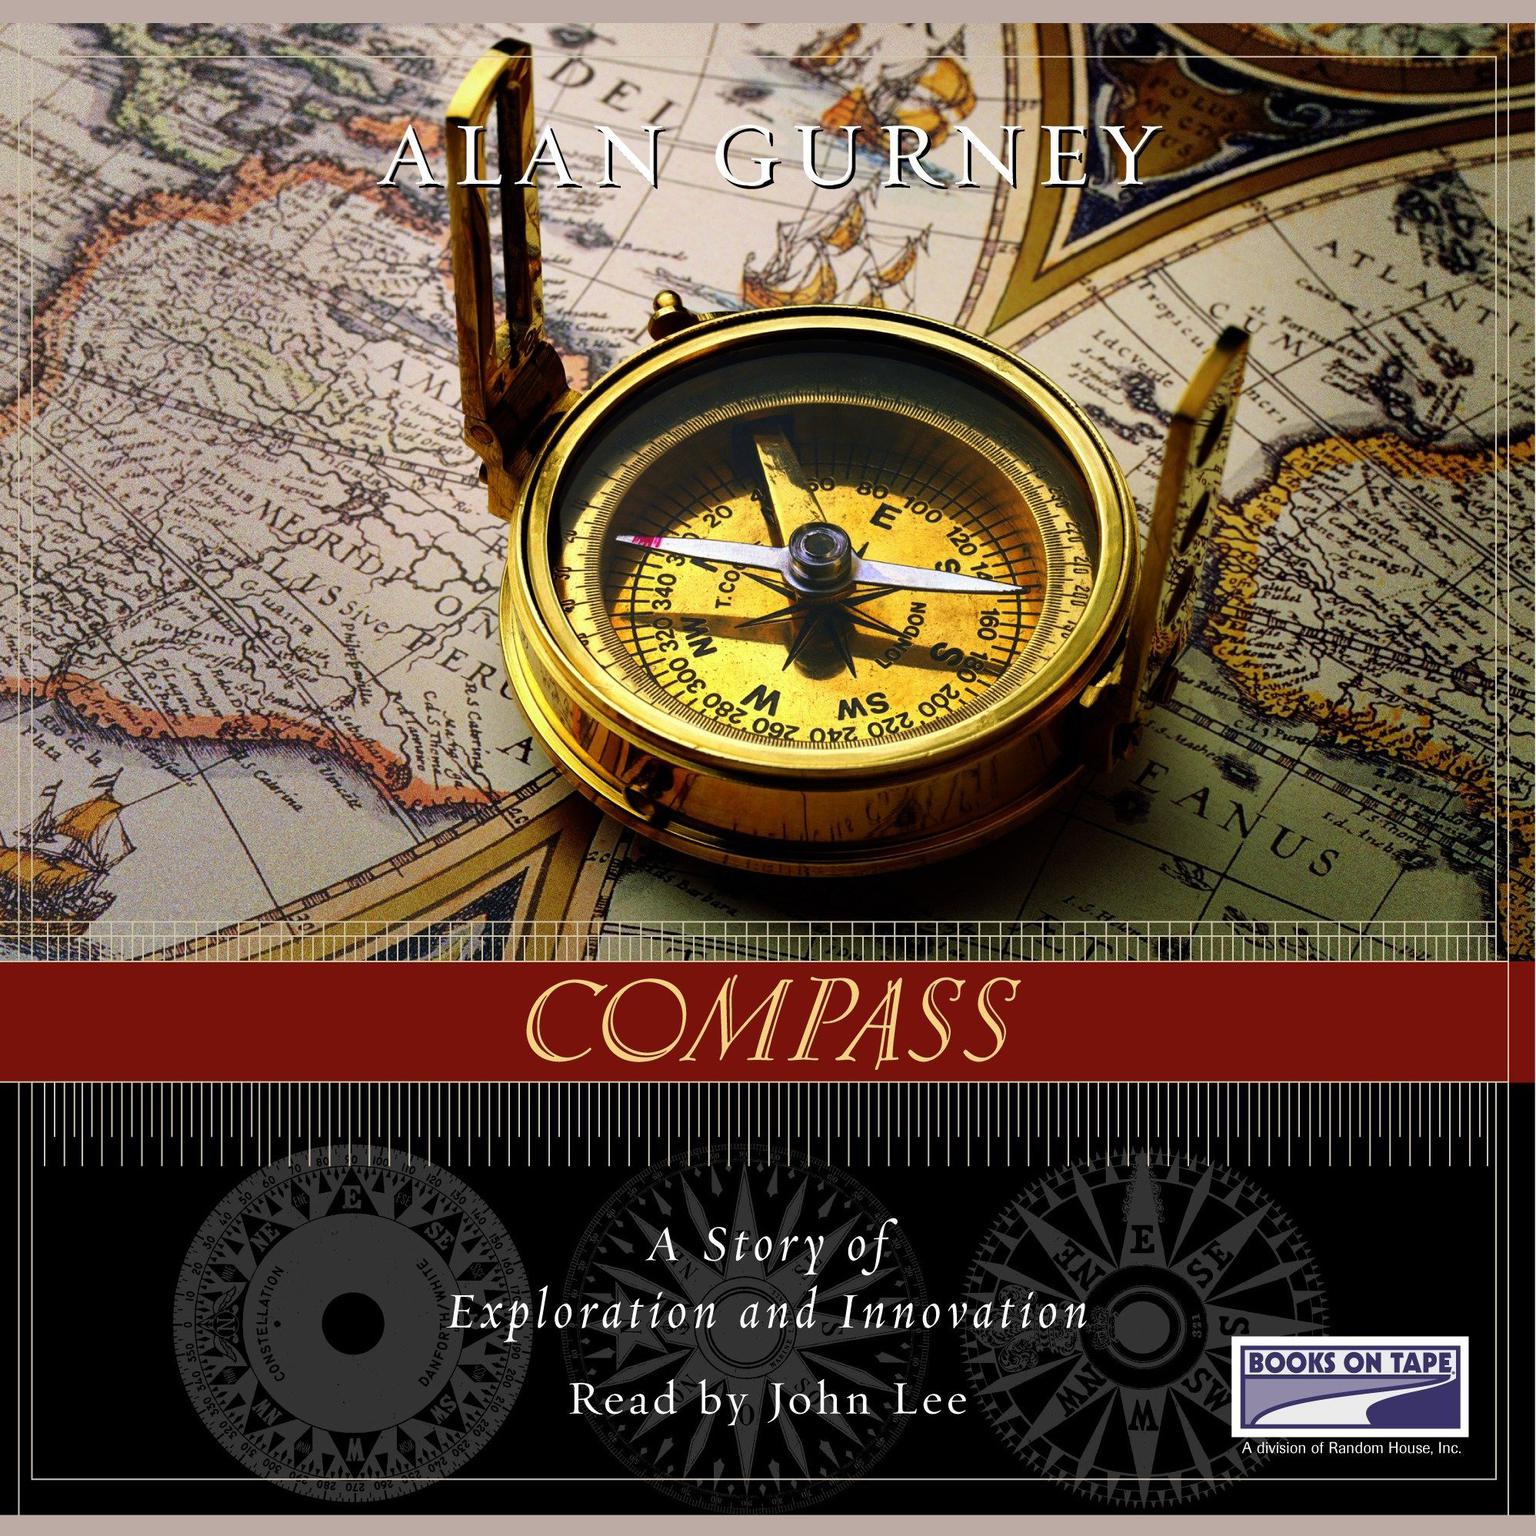 Compass: A Story of Exploration and Innovation Audiobook, by Alan Gurney